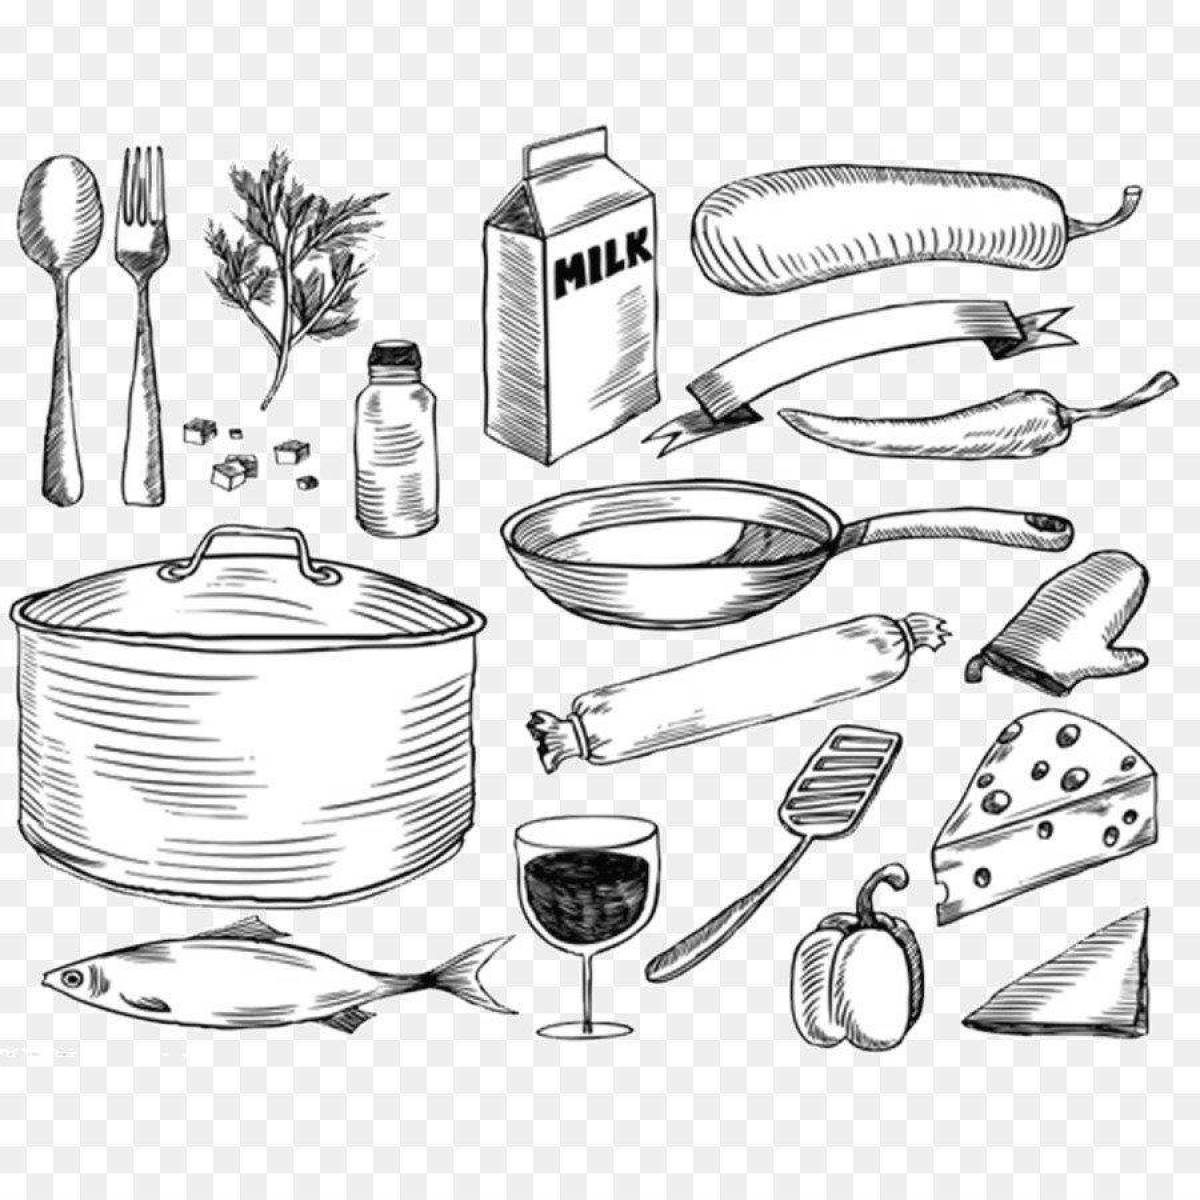 Great cook tools coloring book